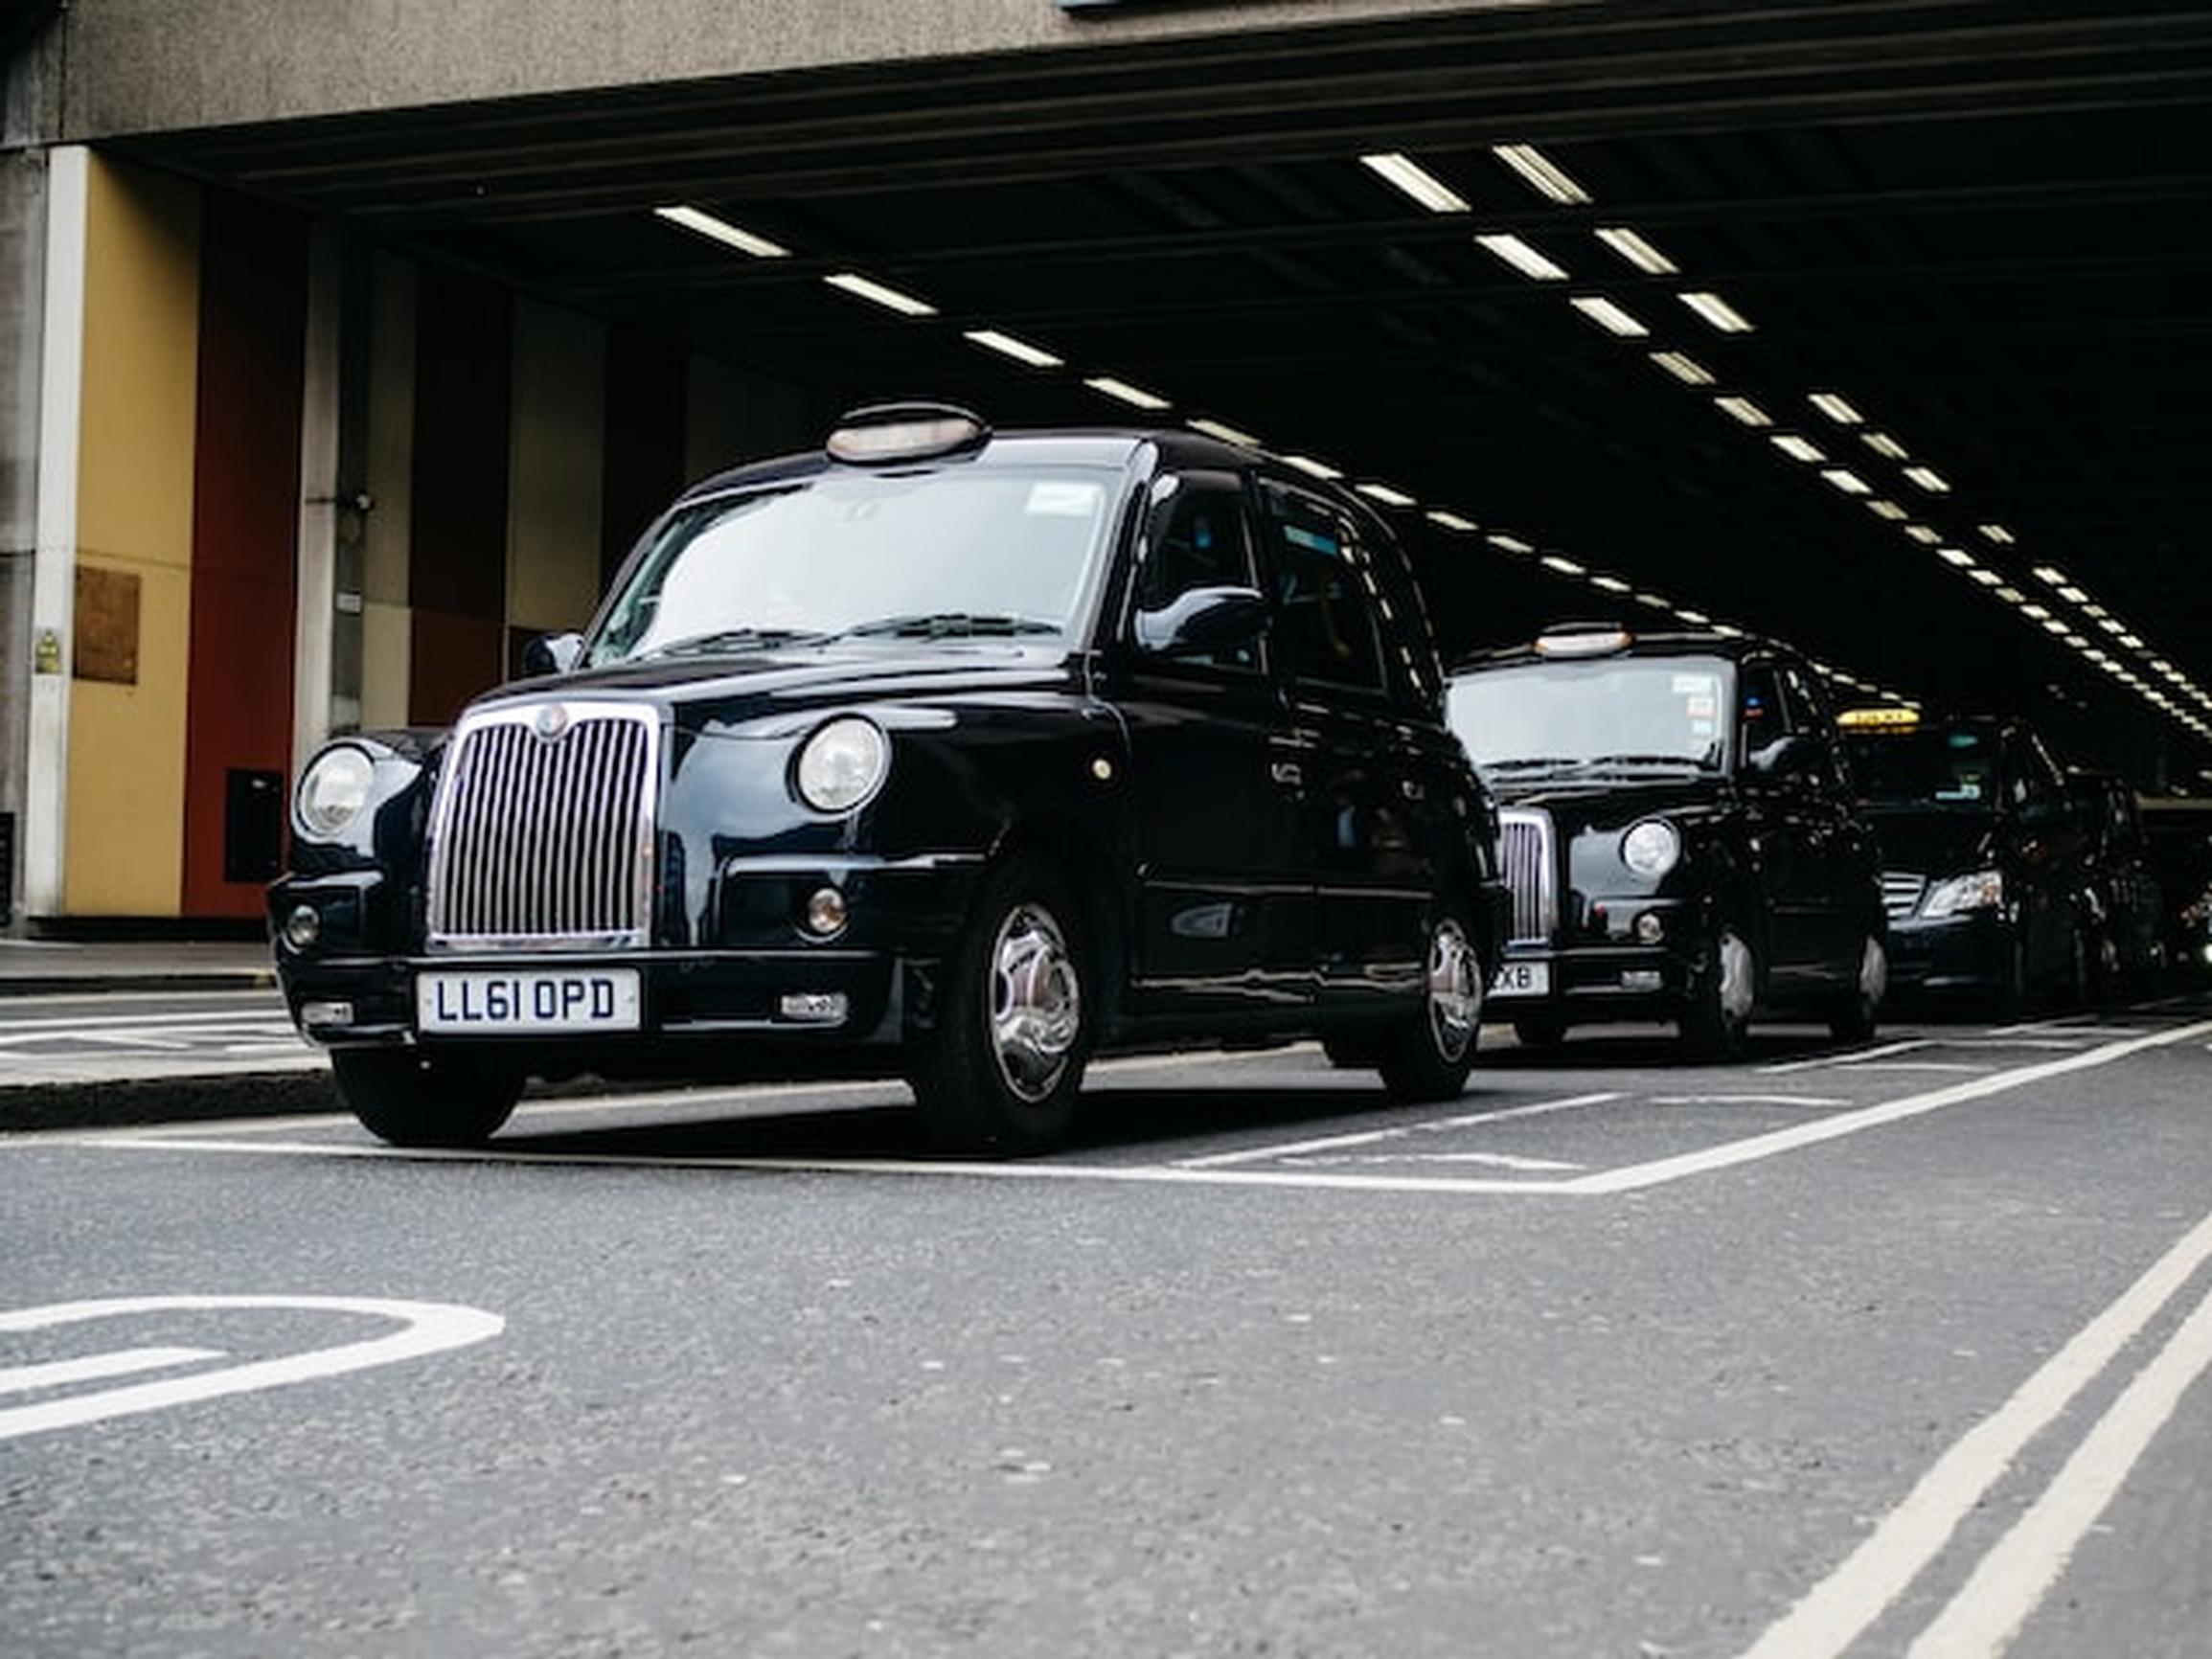 All new London cabs must now be zero-emission capable